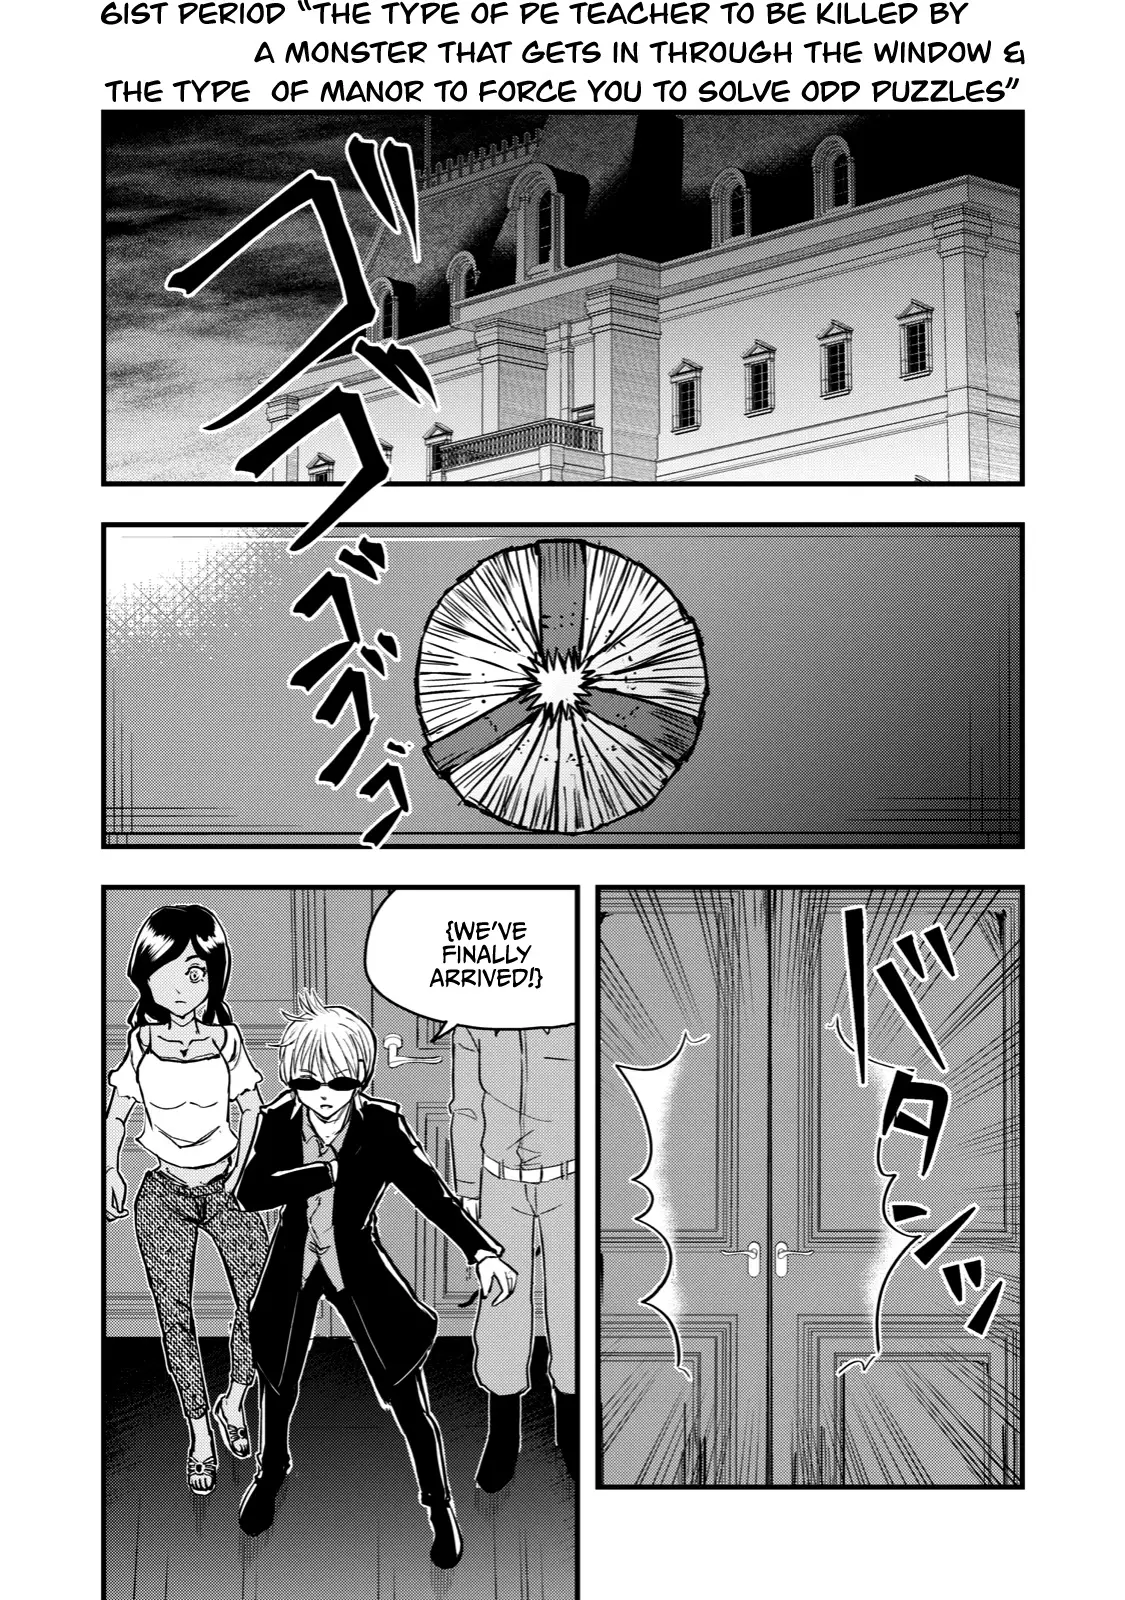 A Manga About The Kind Of Pe Teacher Who Dies At The Start Of A School Horror Movie - 61 page 1-d4b6f03d